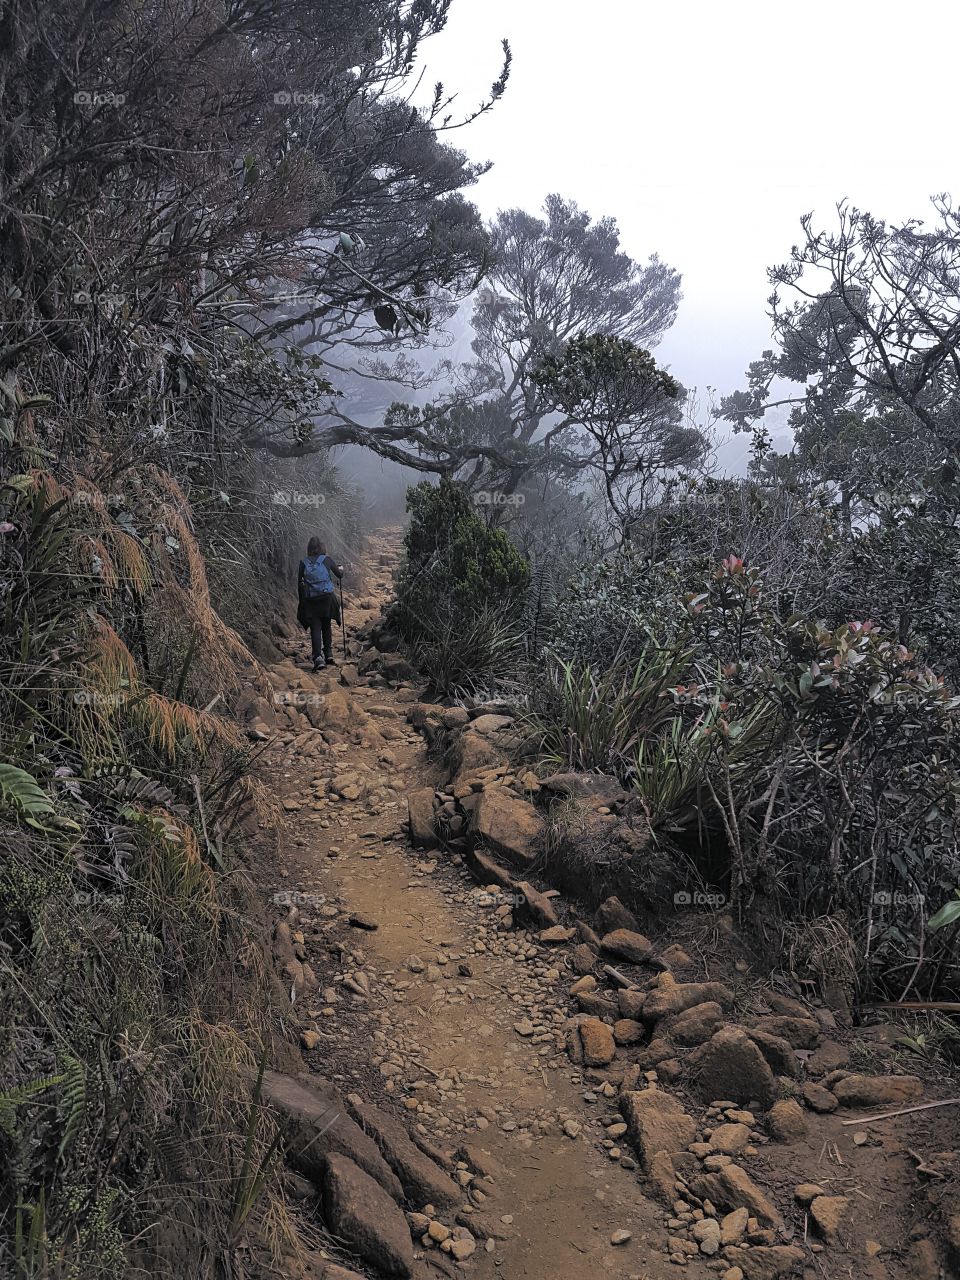 Hiking into the mist